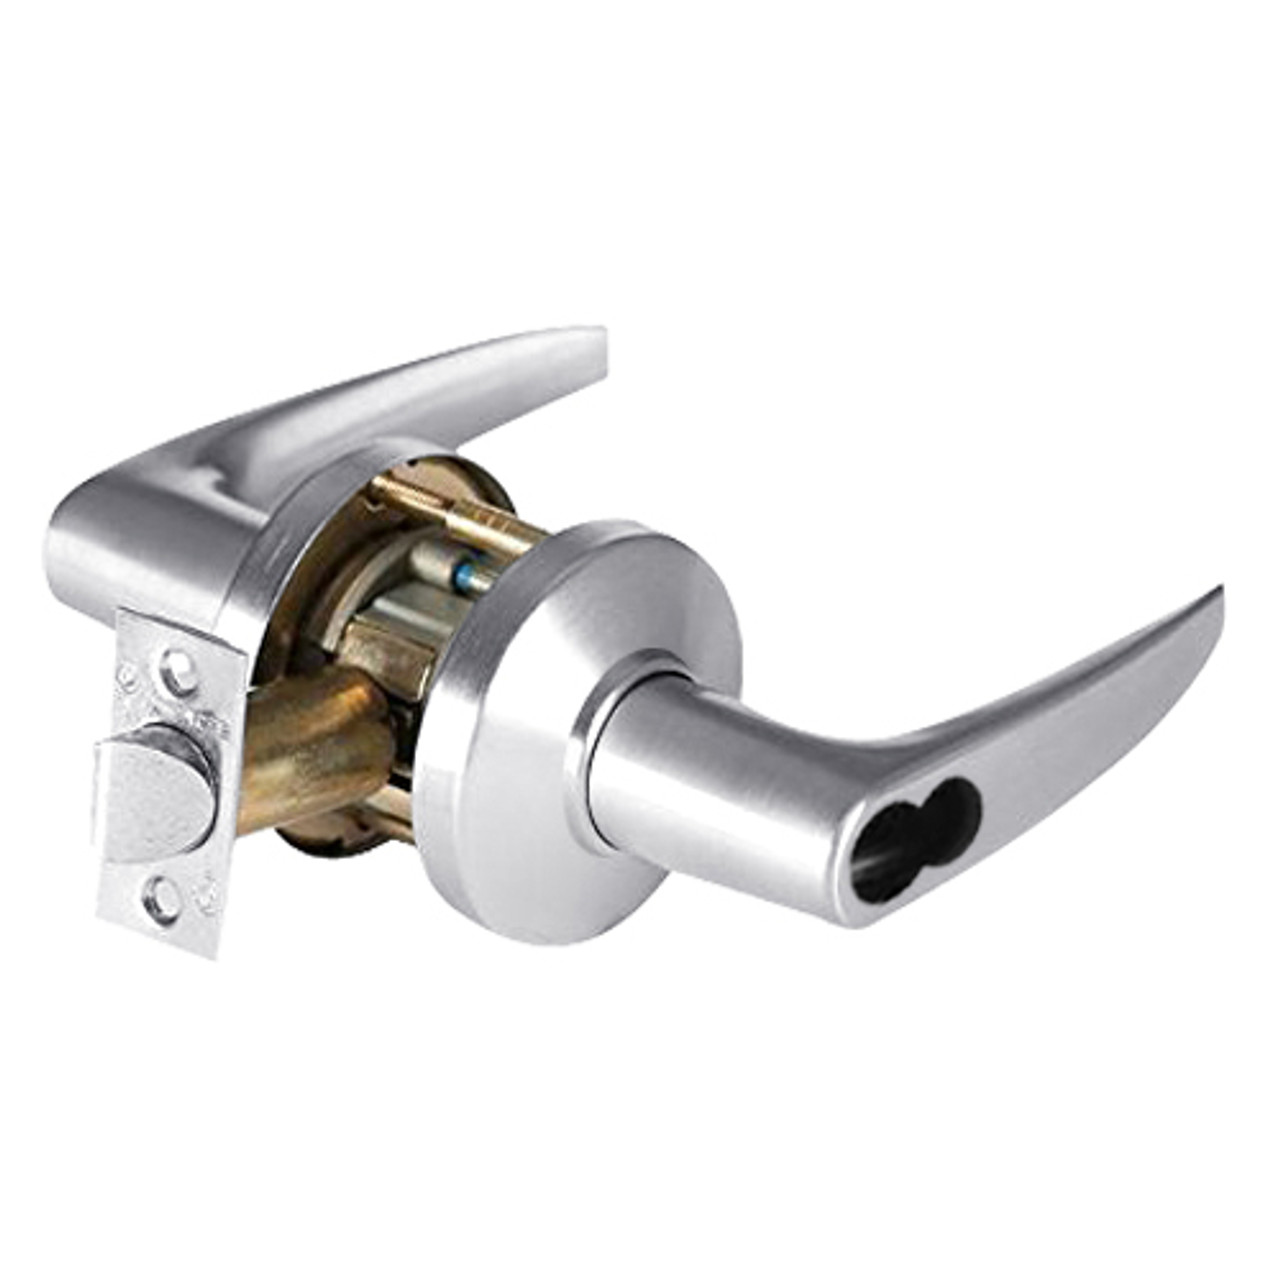 9K37AB16CSTK625 Best 9K Series Entrance Cylindrical Lever Locks with Curved without Return Lever Design Accept 7 Pin Best Core in Bright Chrome